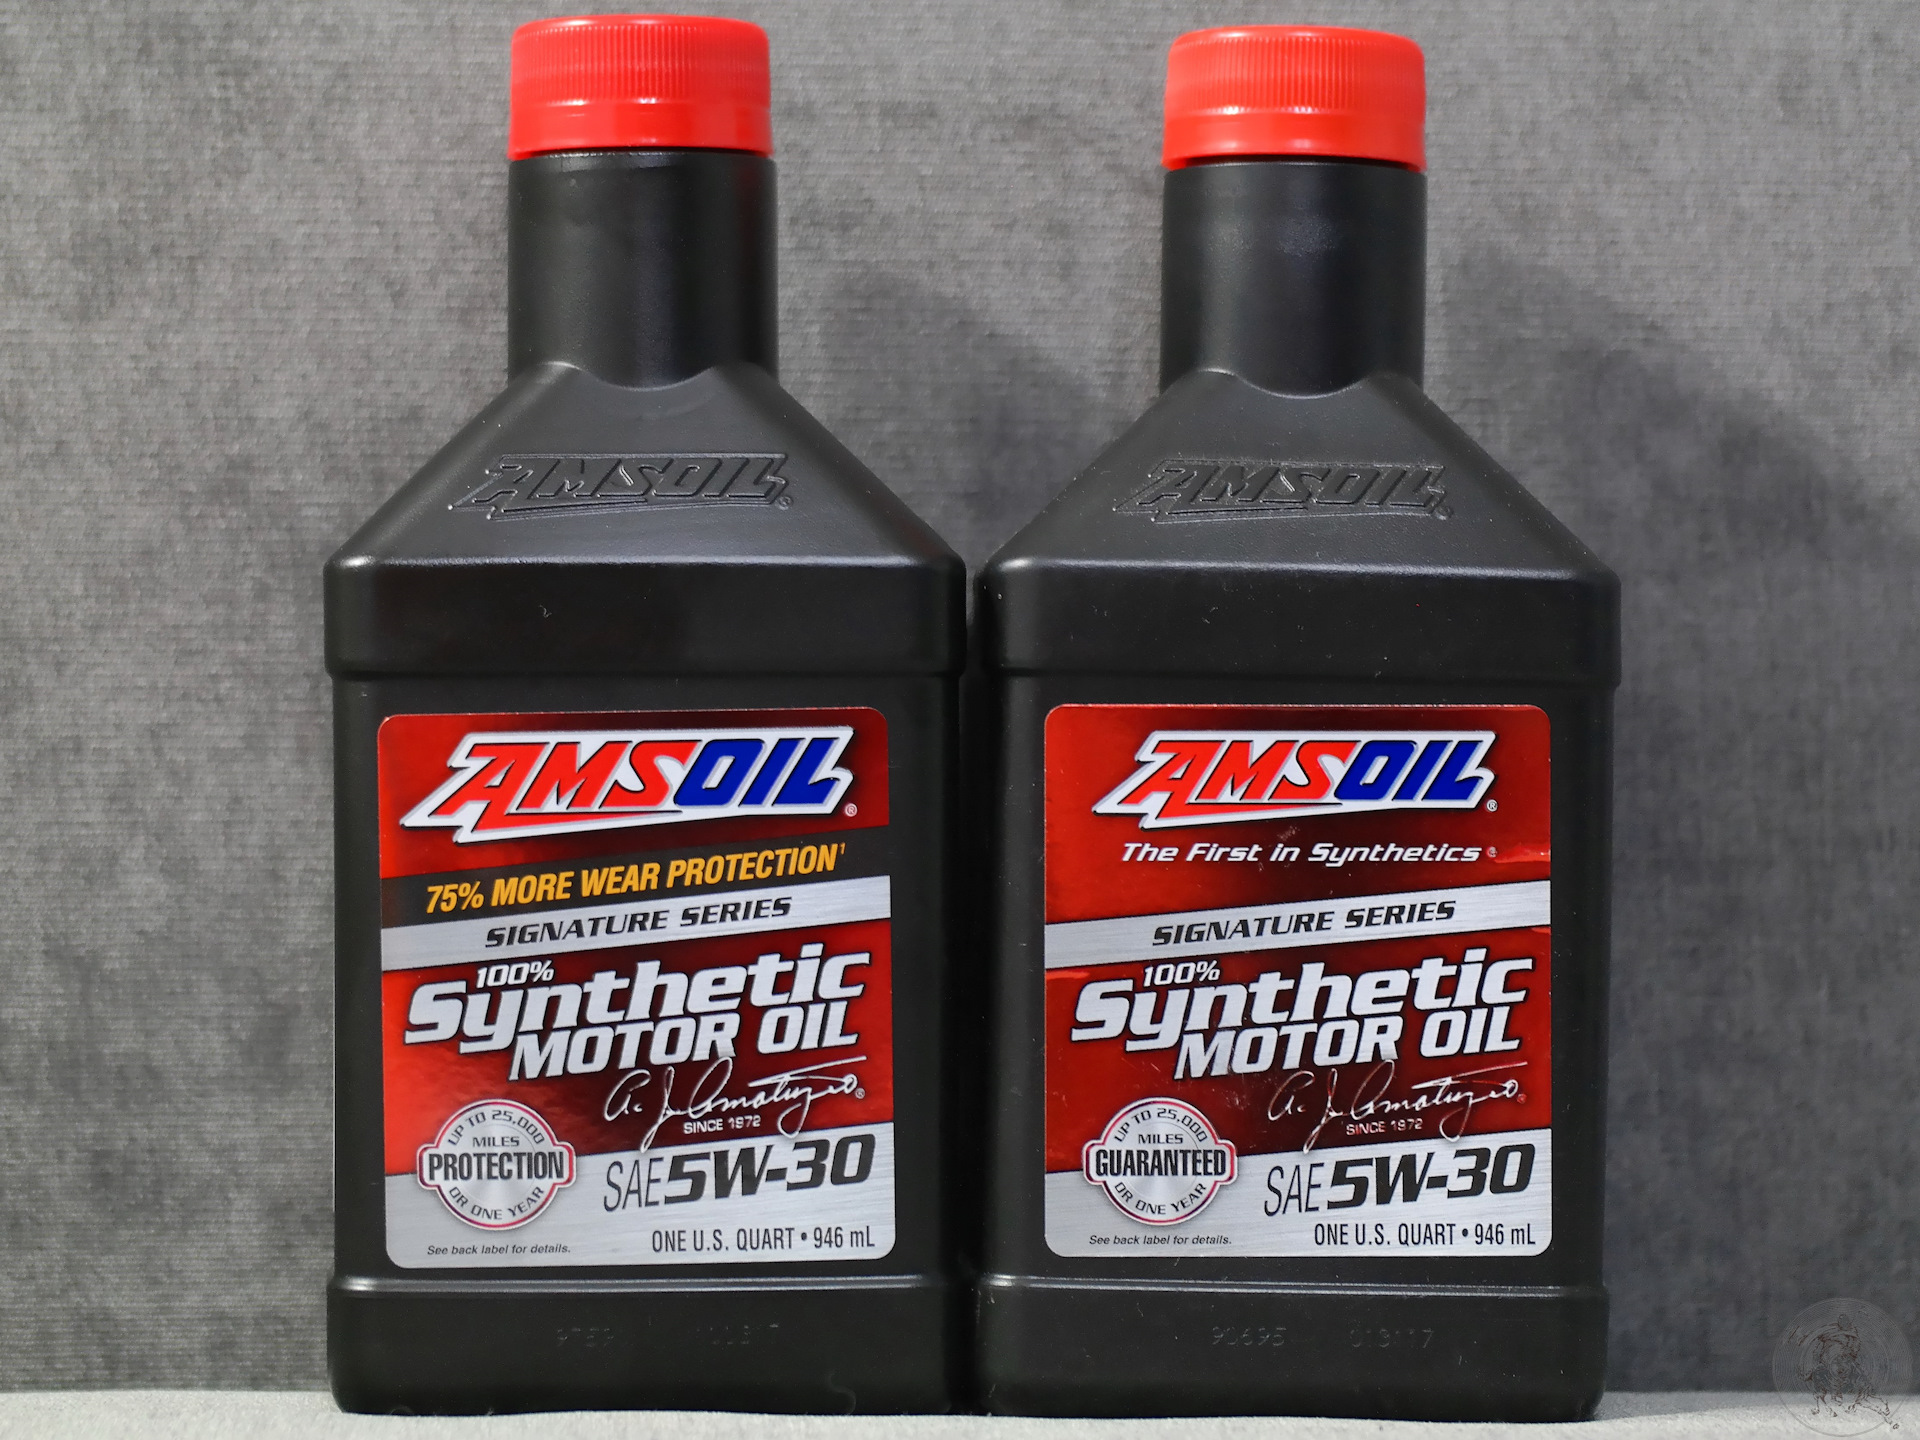 Amsoil signature series synthetic. AMSOIL 5w30. AMSOIL SS 5w30. AMSOIL 5w30 Signature. AMSOIL Signature Series 5w-30.